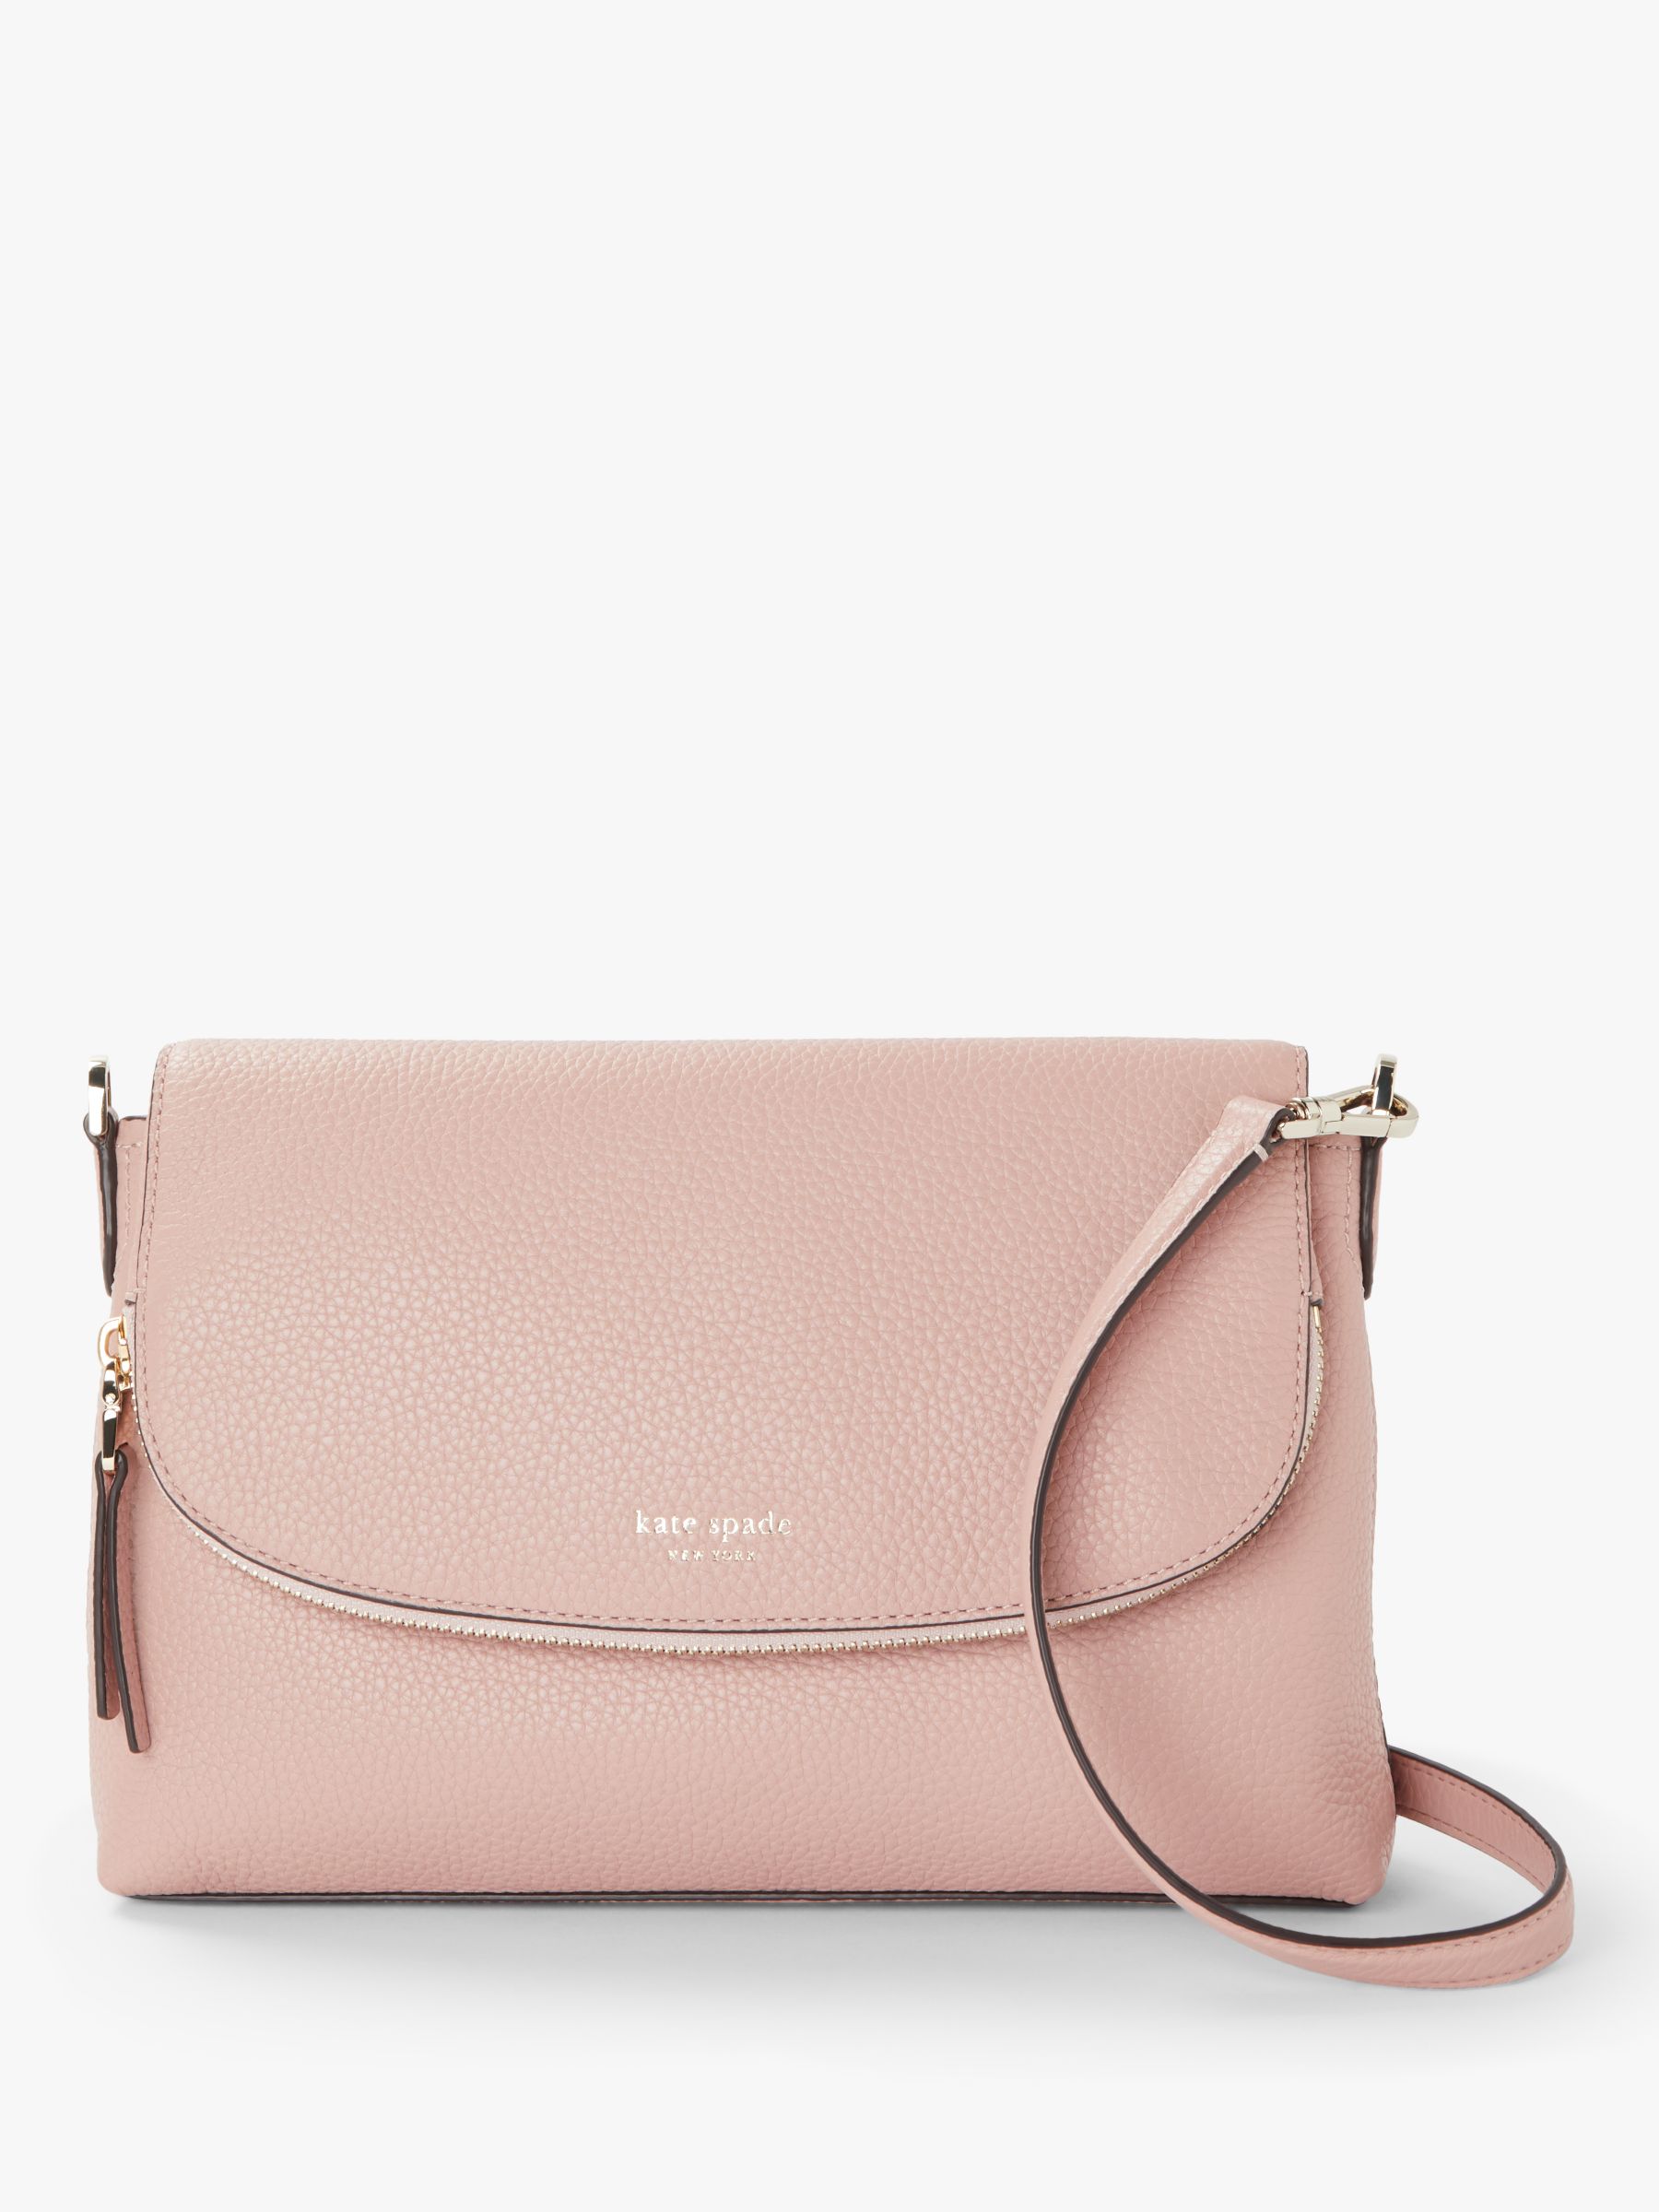 kate spade new york Polly Leather Large Flap Over Cross Body Bag, Flapper Pink at John Lewis ...